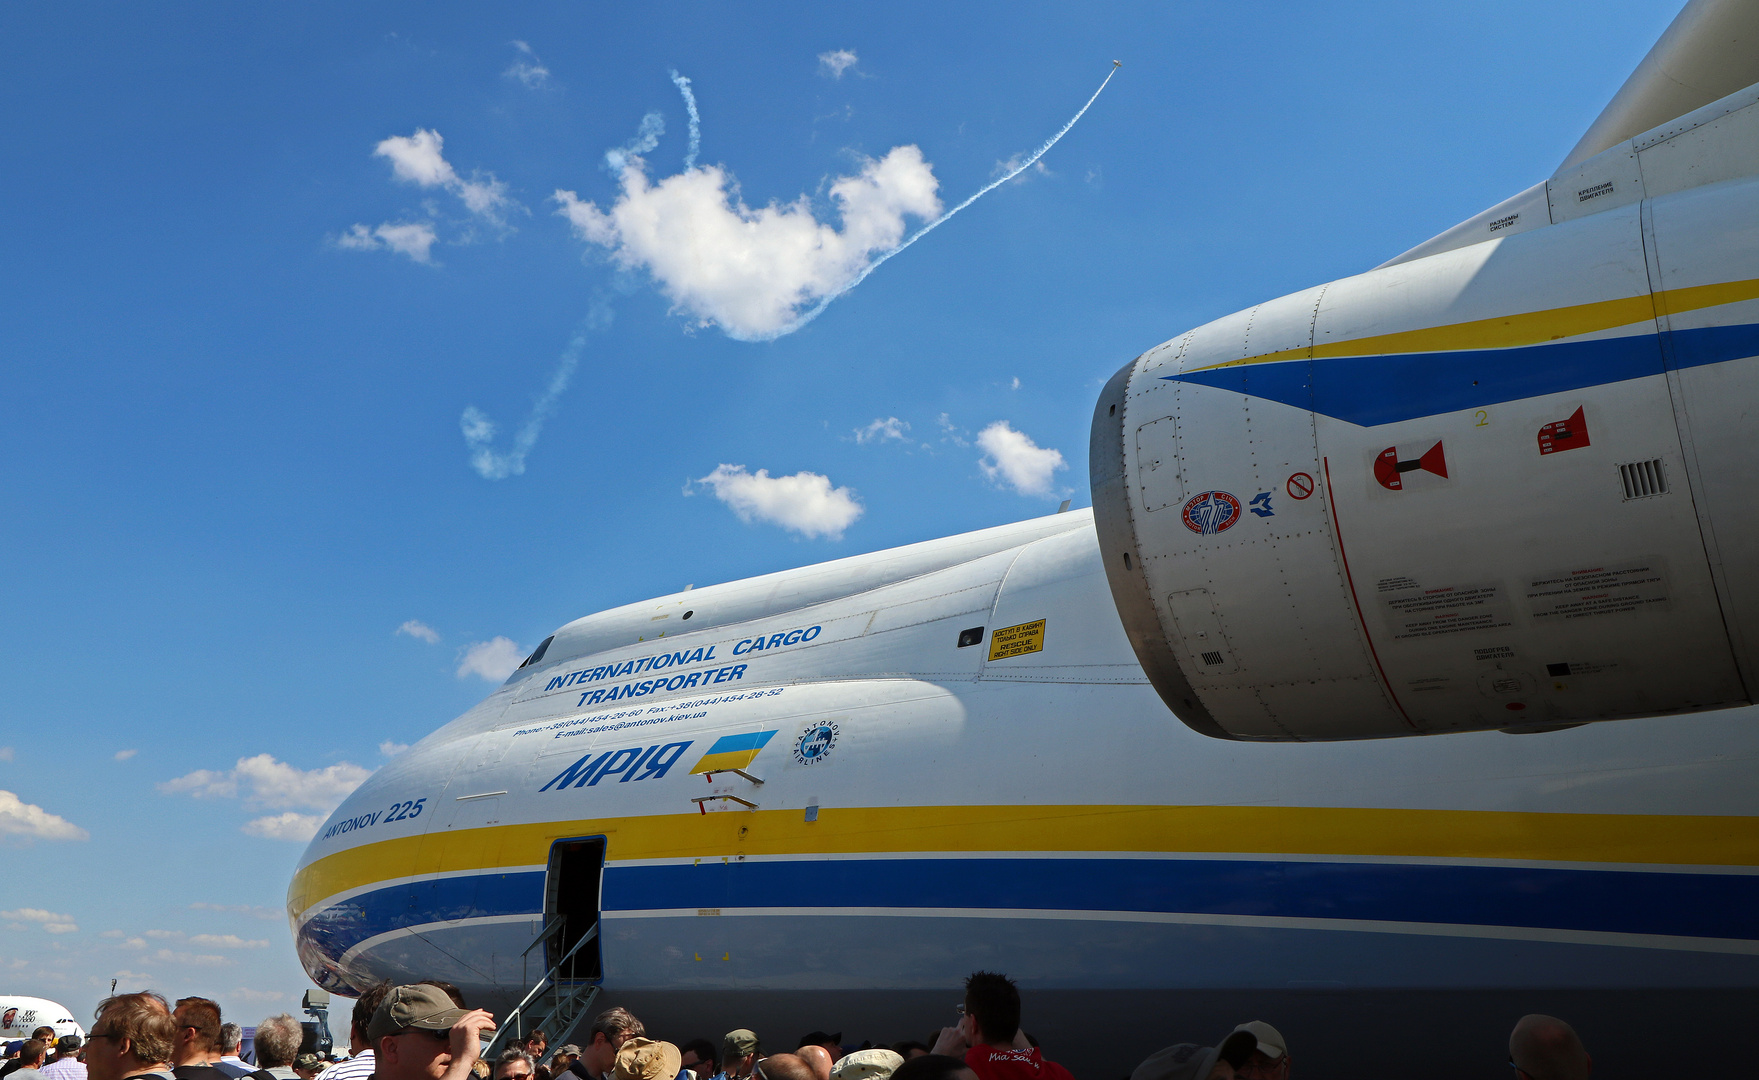 to many People in front of Antonov